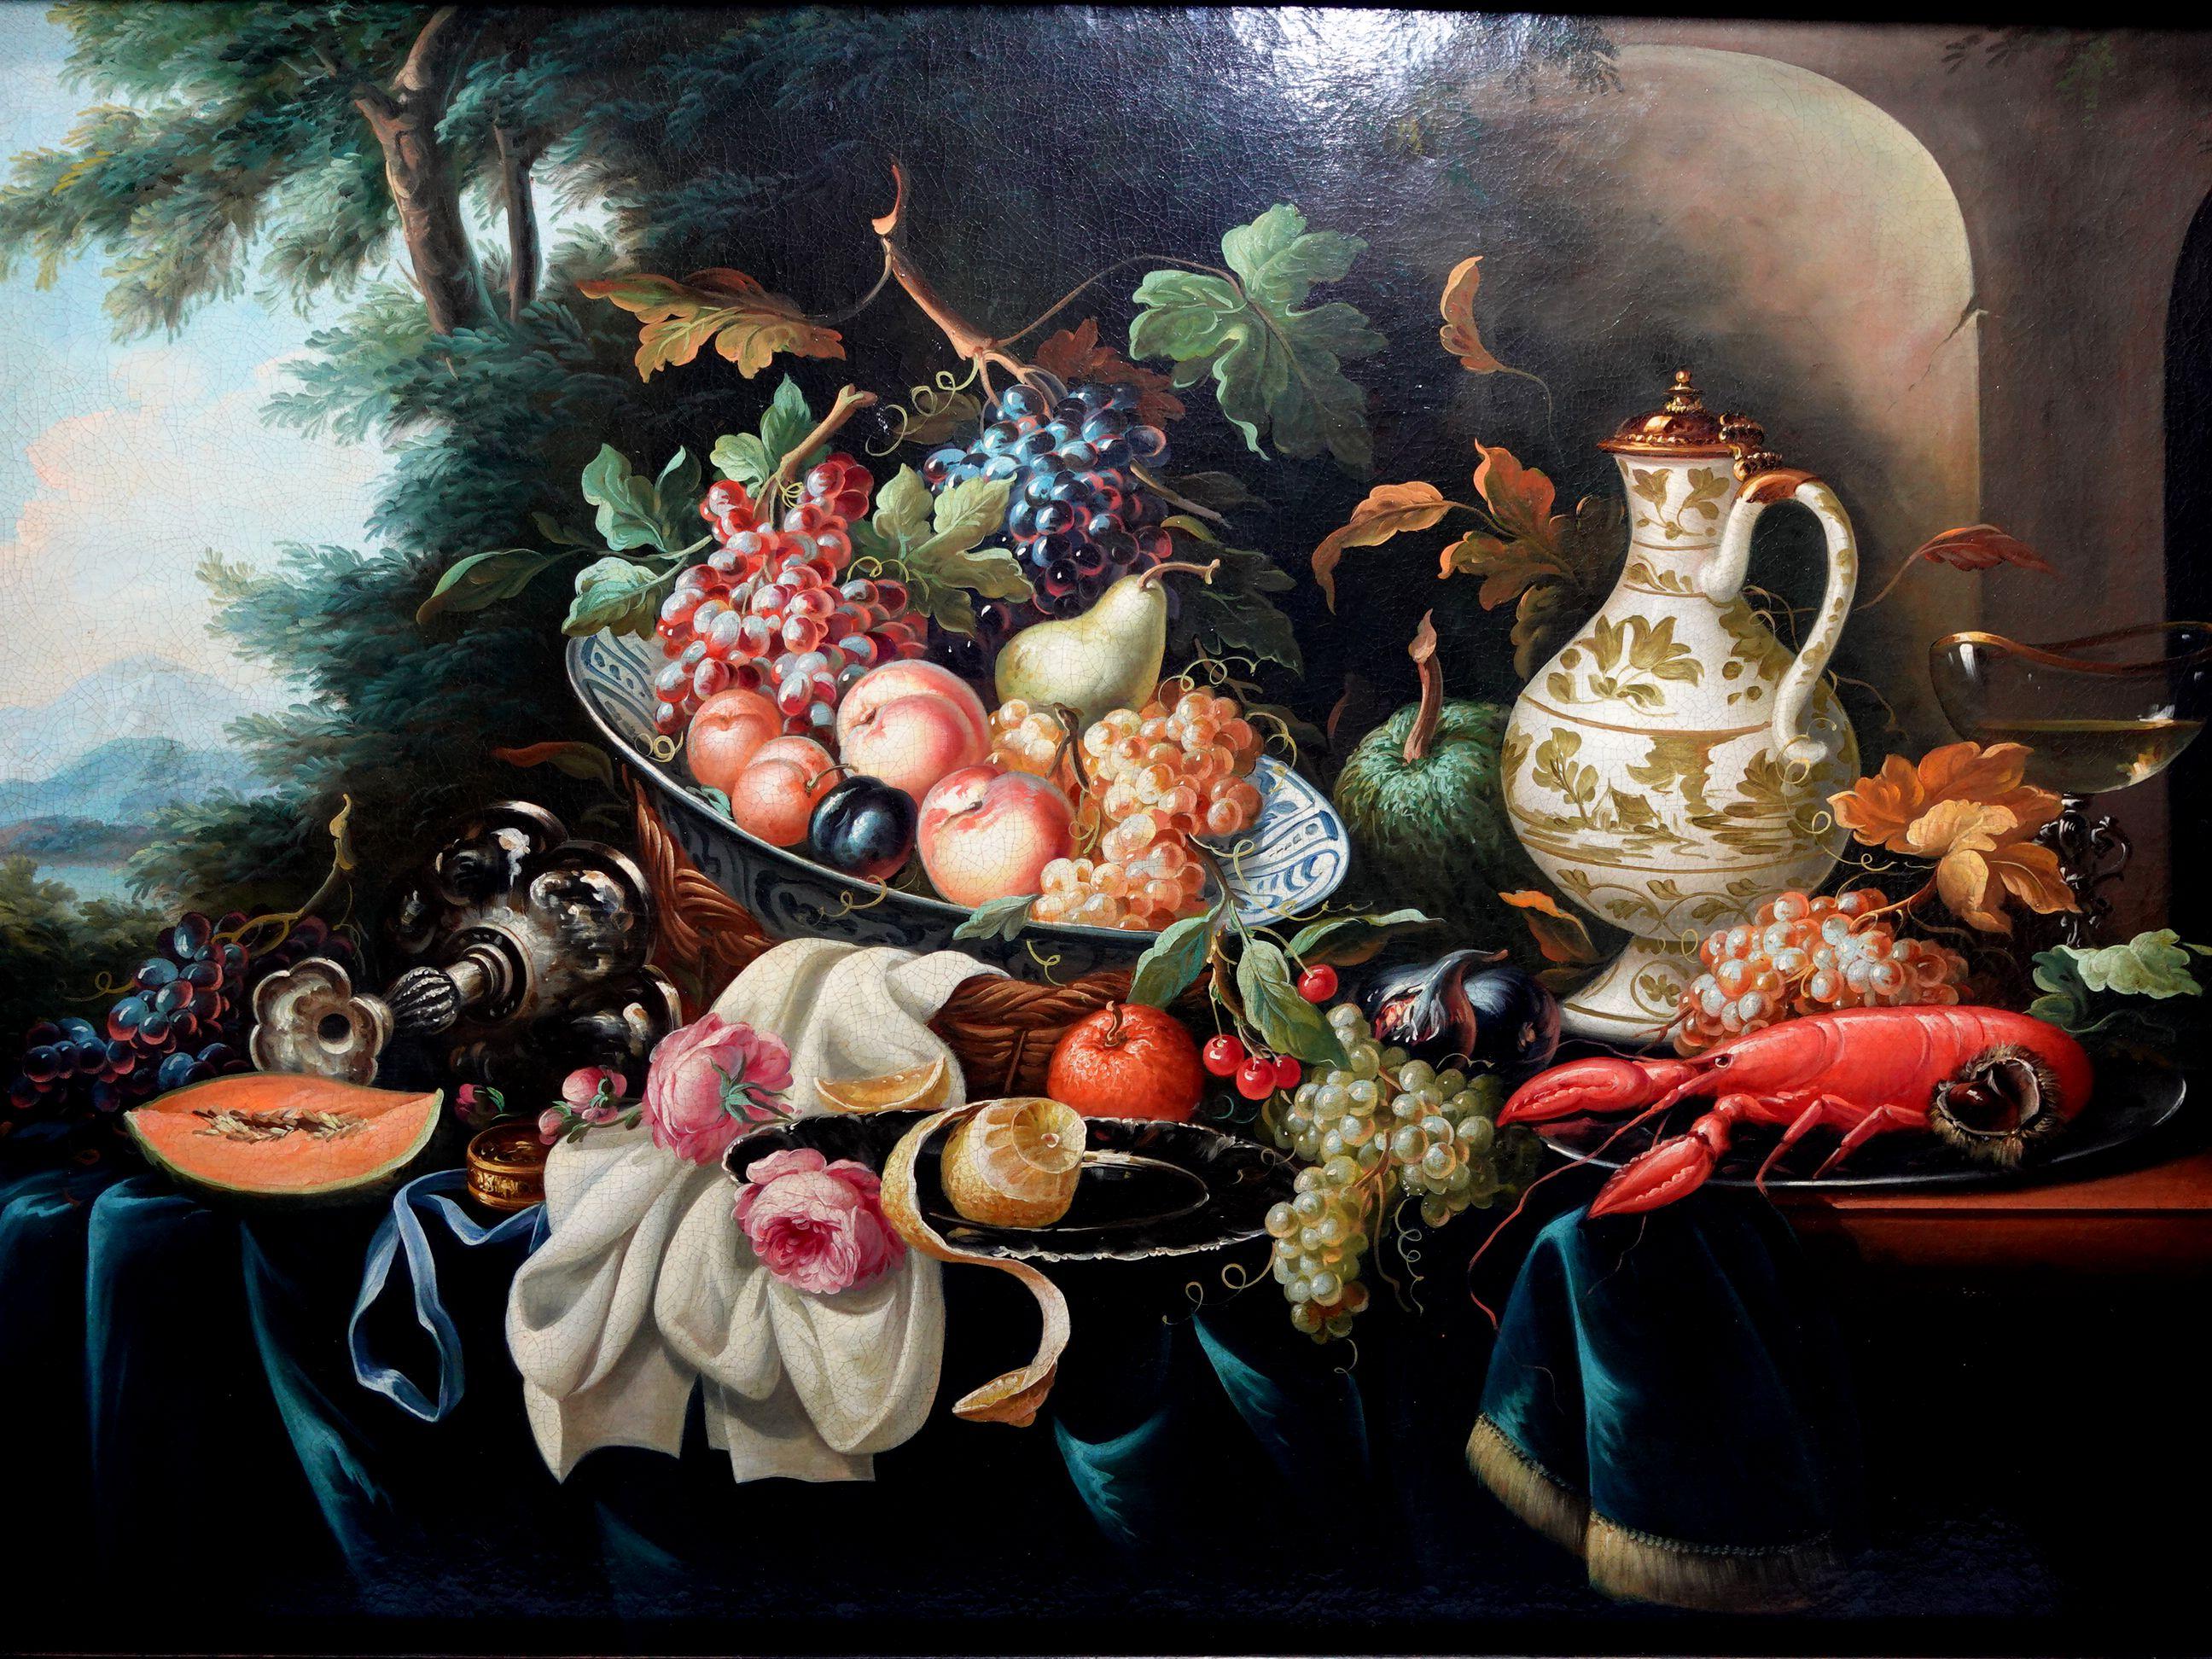 Dutch School (18th century)
Still Life with Lobster and Fruit
oil on canvas
68 x 98 1/2 cm (26 3/4 x 38 9/16 in).
framed 86 1/2 x 117 x 6 cm. (34 x 46 x 2 2/5 in.)